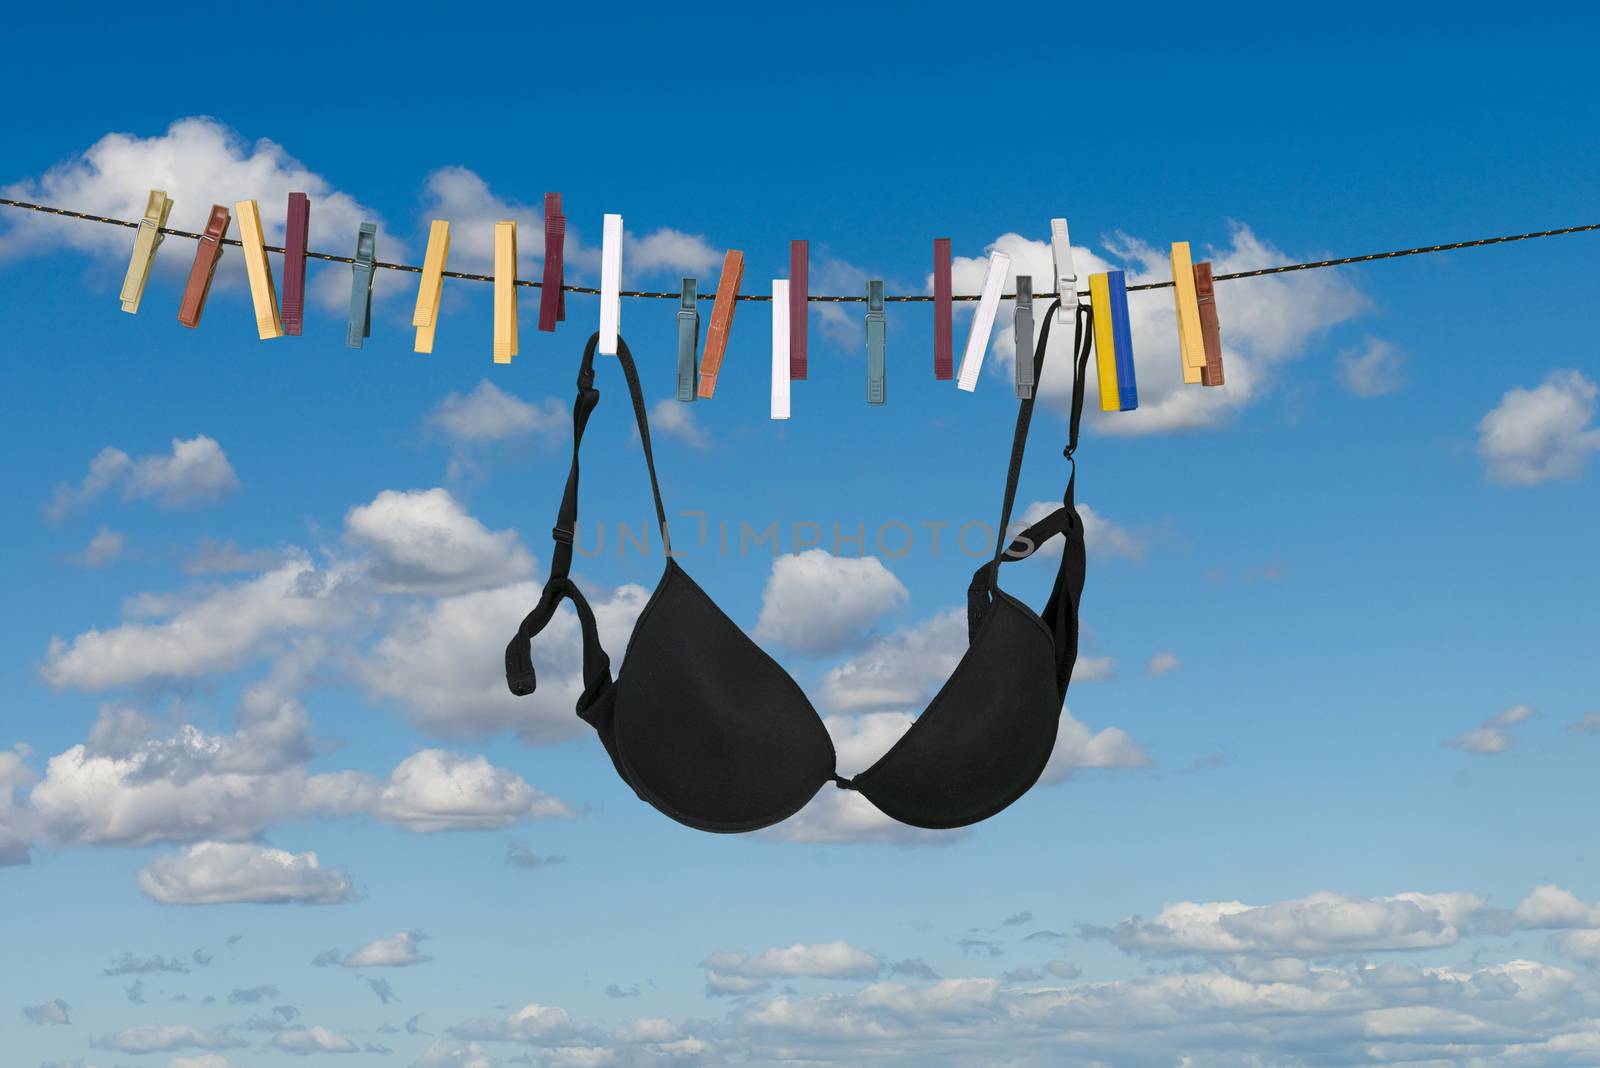 A bra hanging to dry on open air